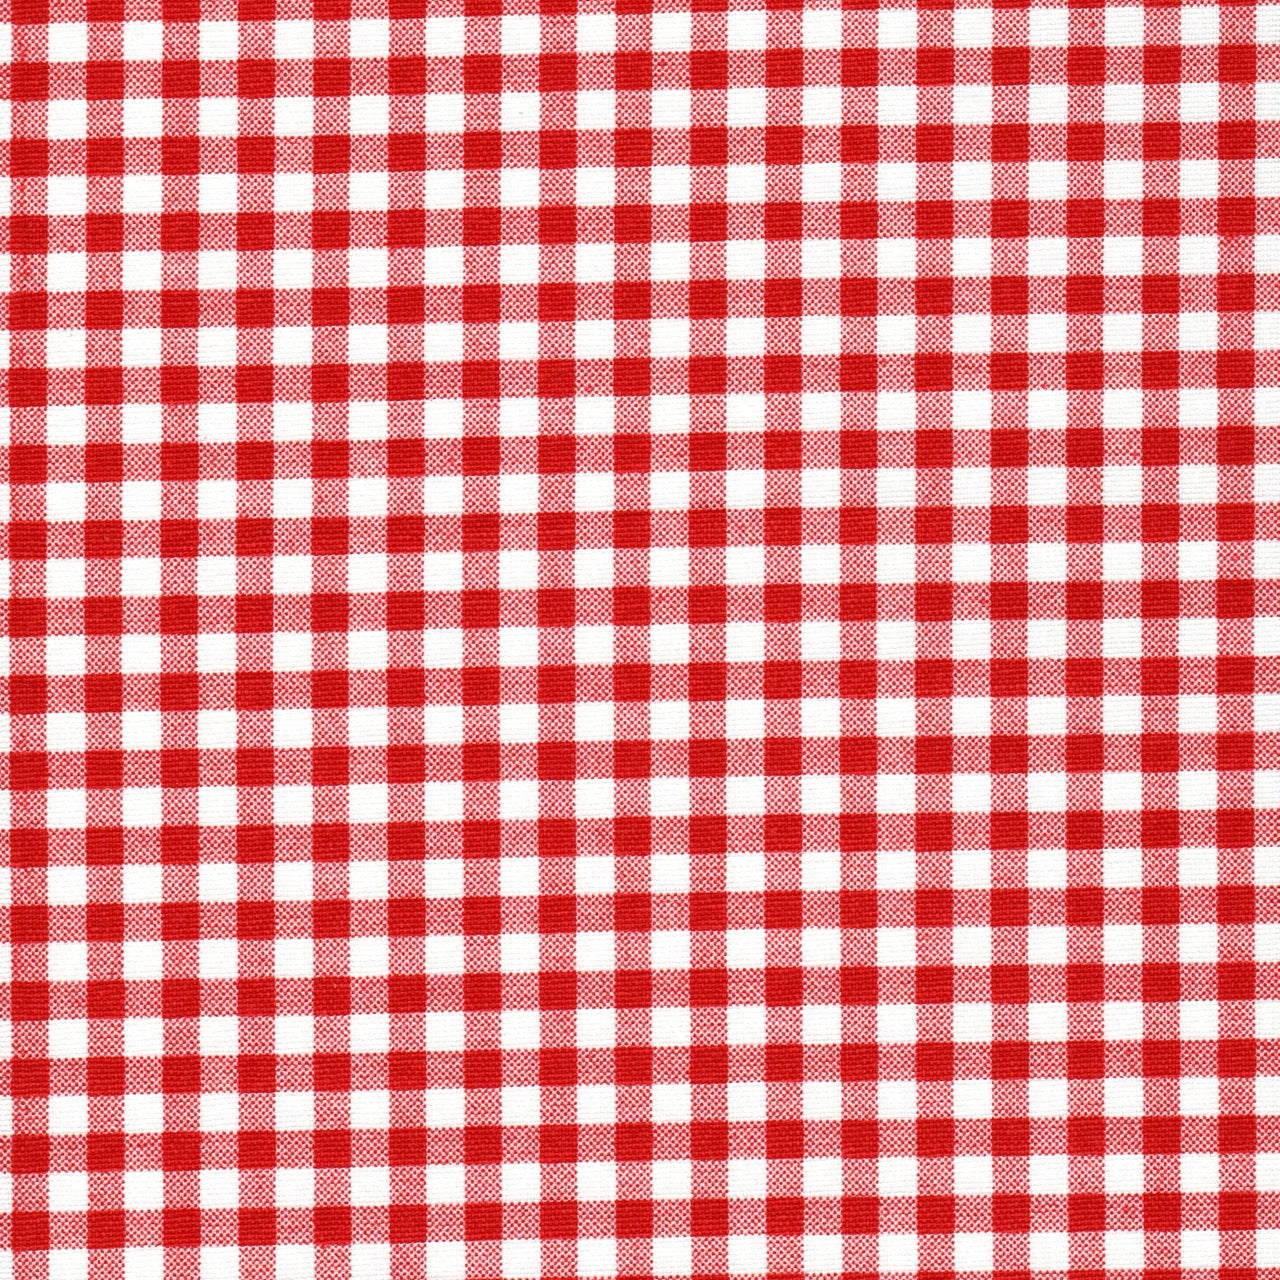 Rod Pocket Curtains in Lipstick Red Large Gingham Check on White